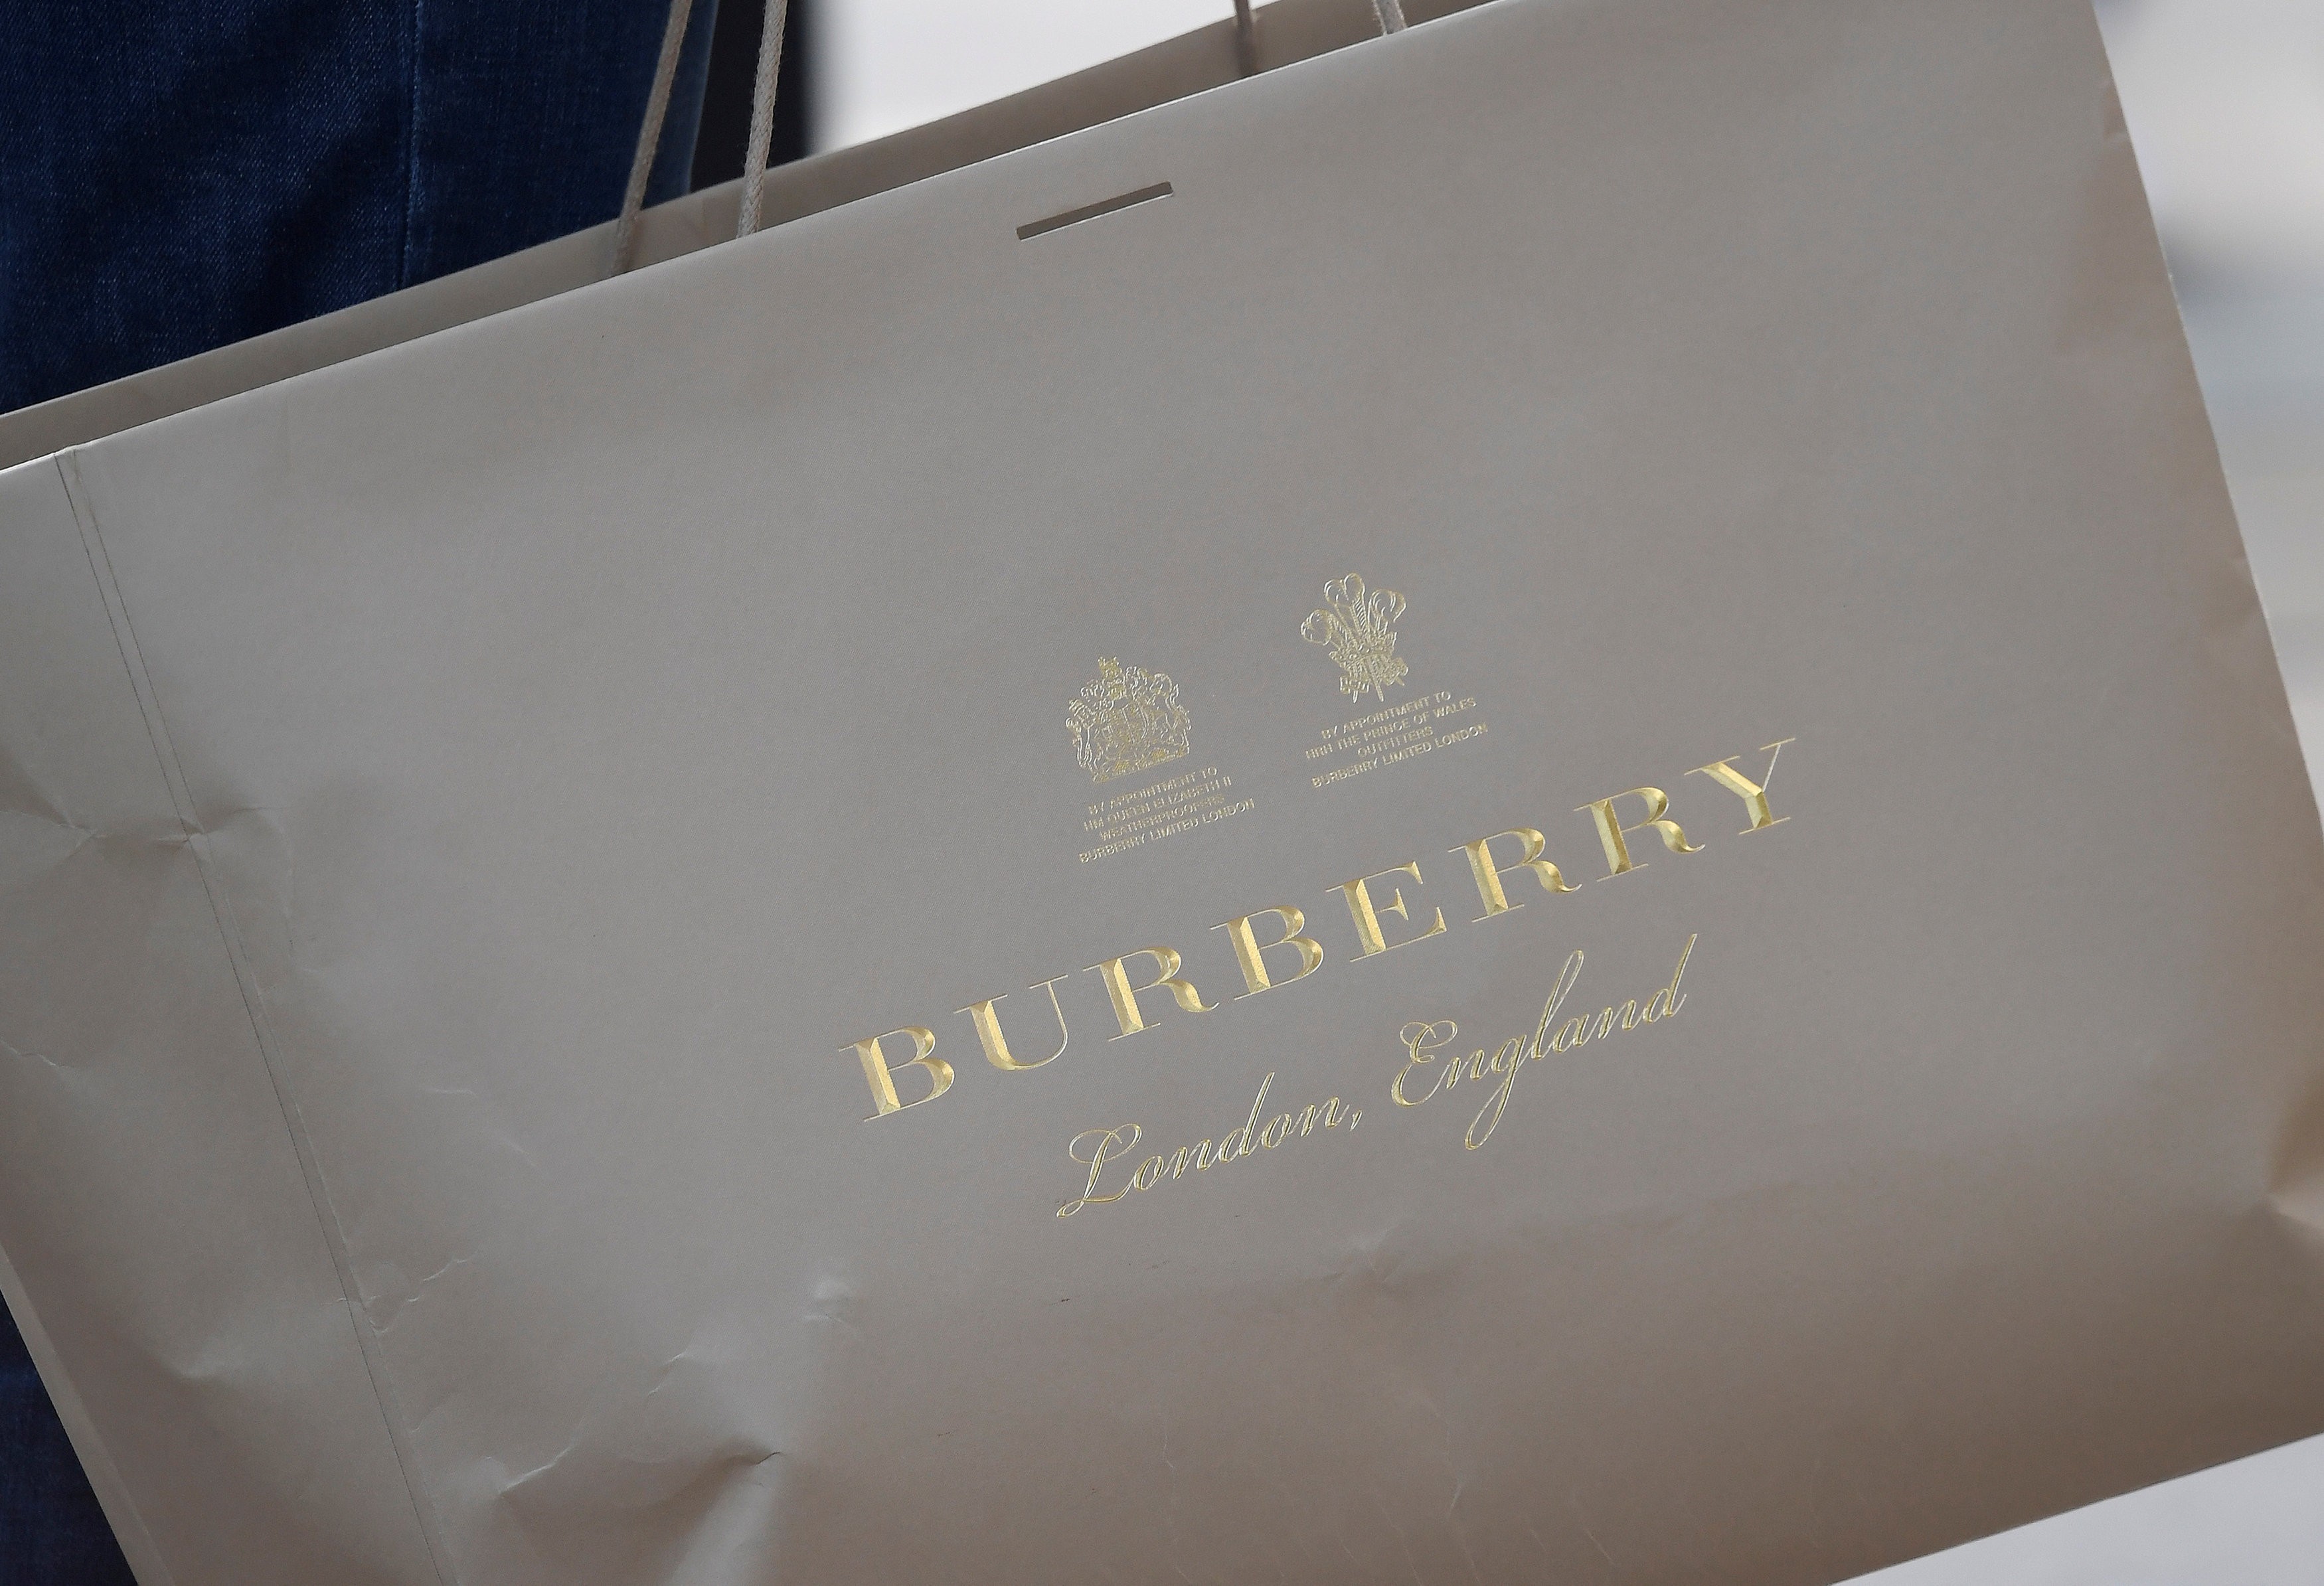 Burberry burns millions in unsold products to protect brand